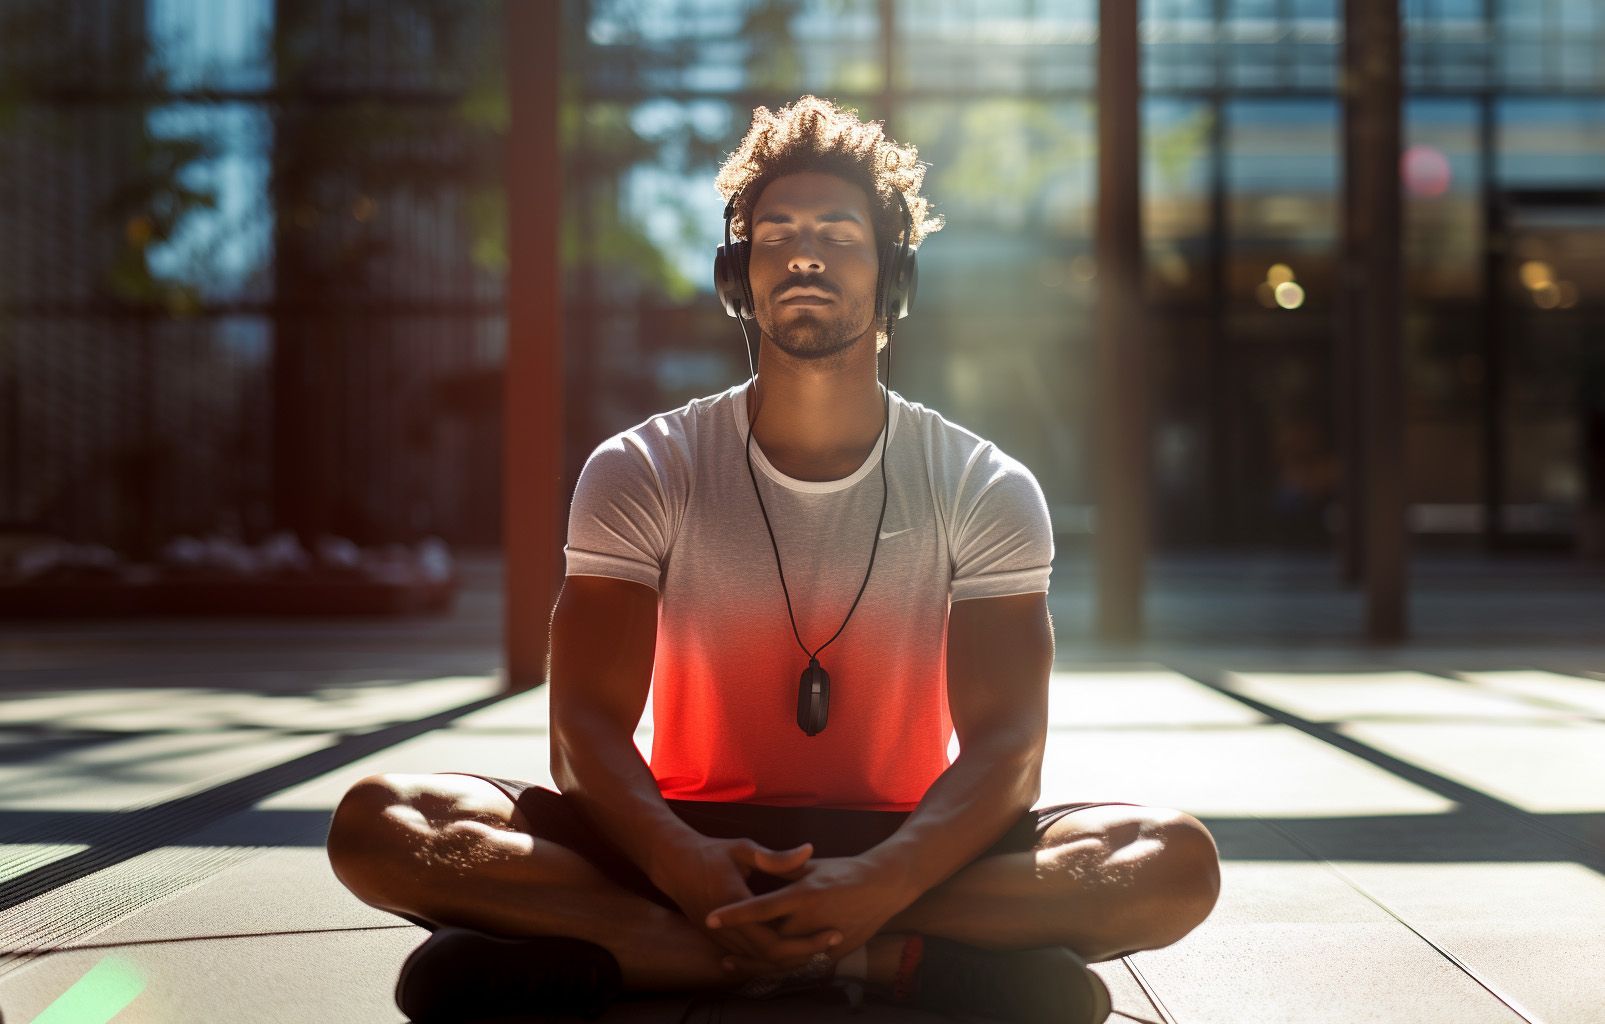 Chip away at anxiety with meditation and exercise